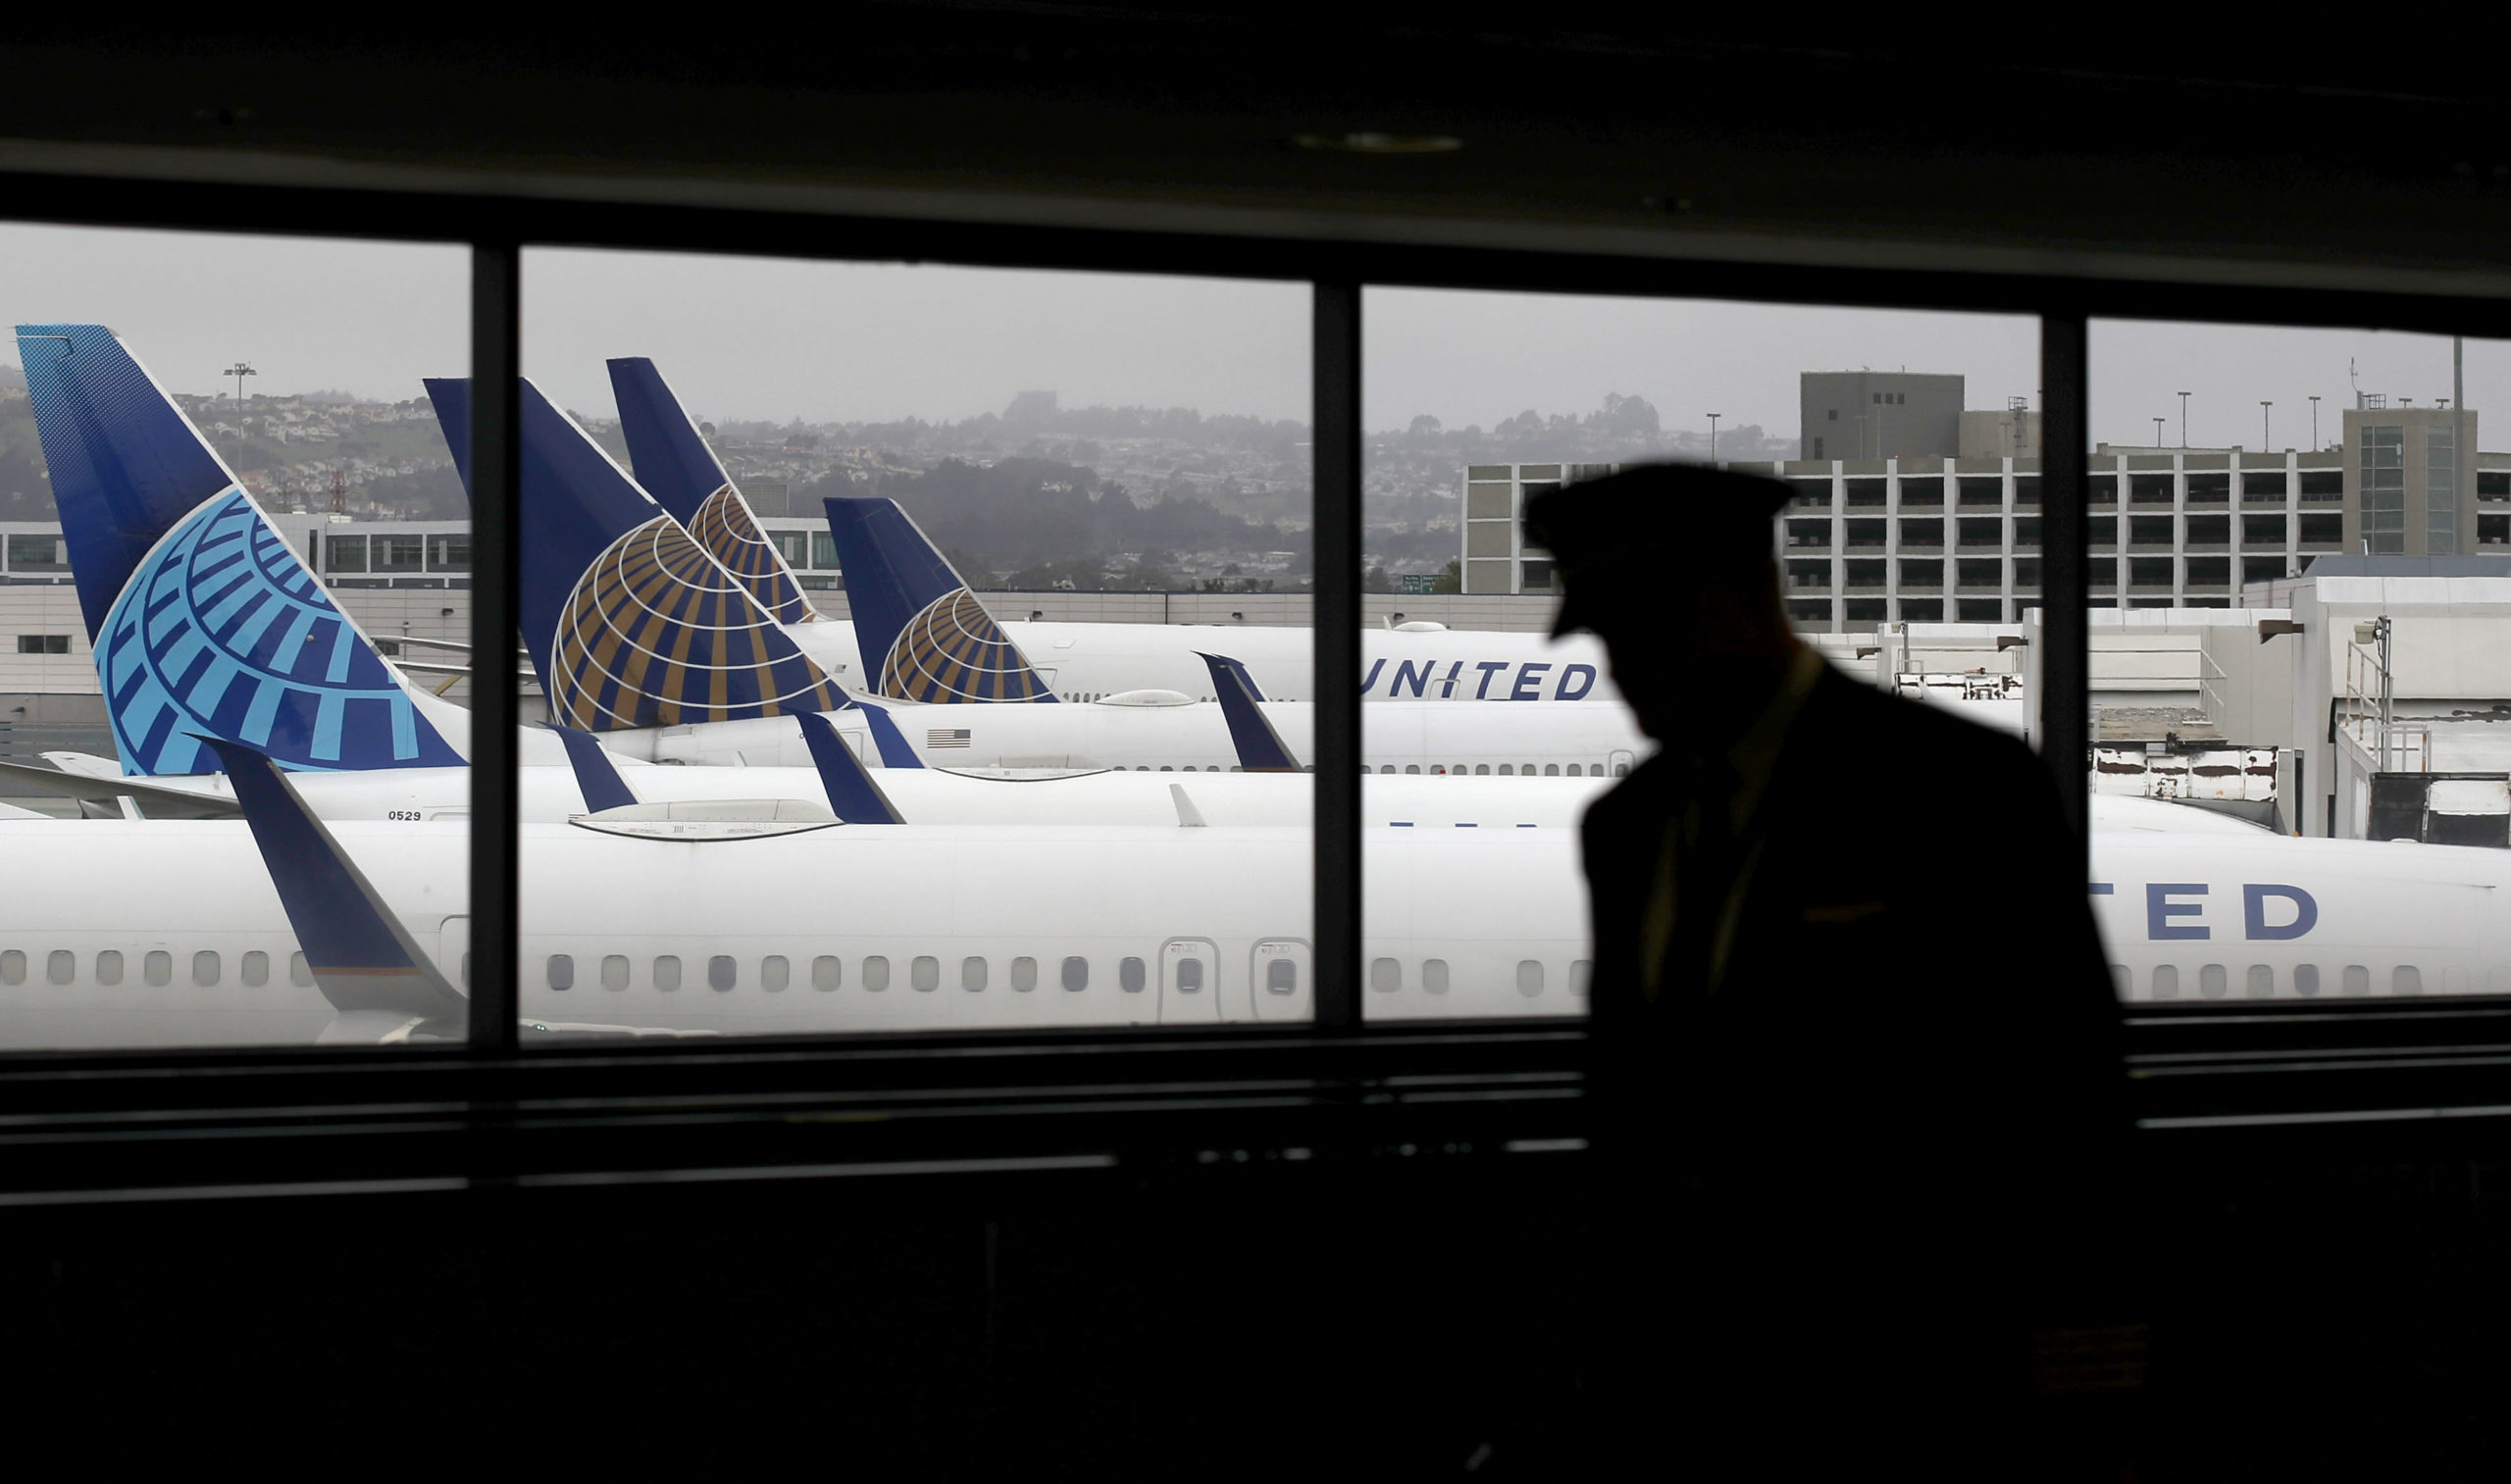 United warns it may furlough extra pilots, extends voluntary go away deadlines